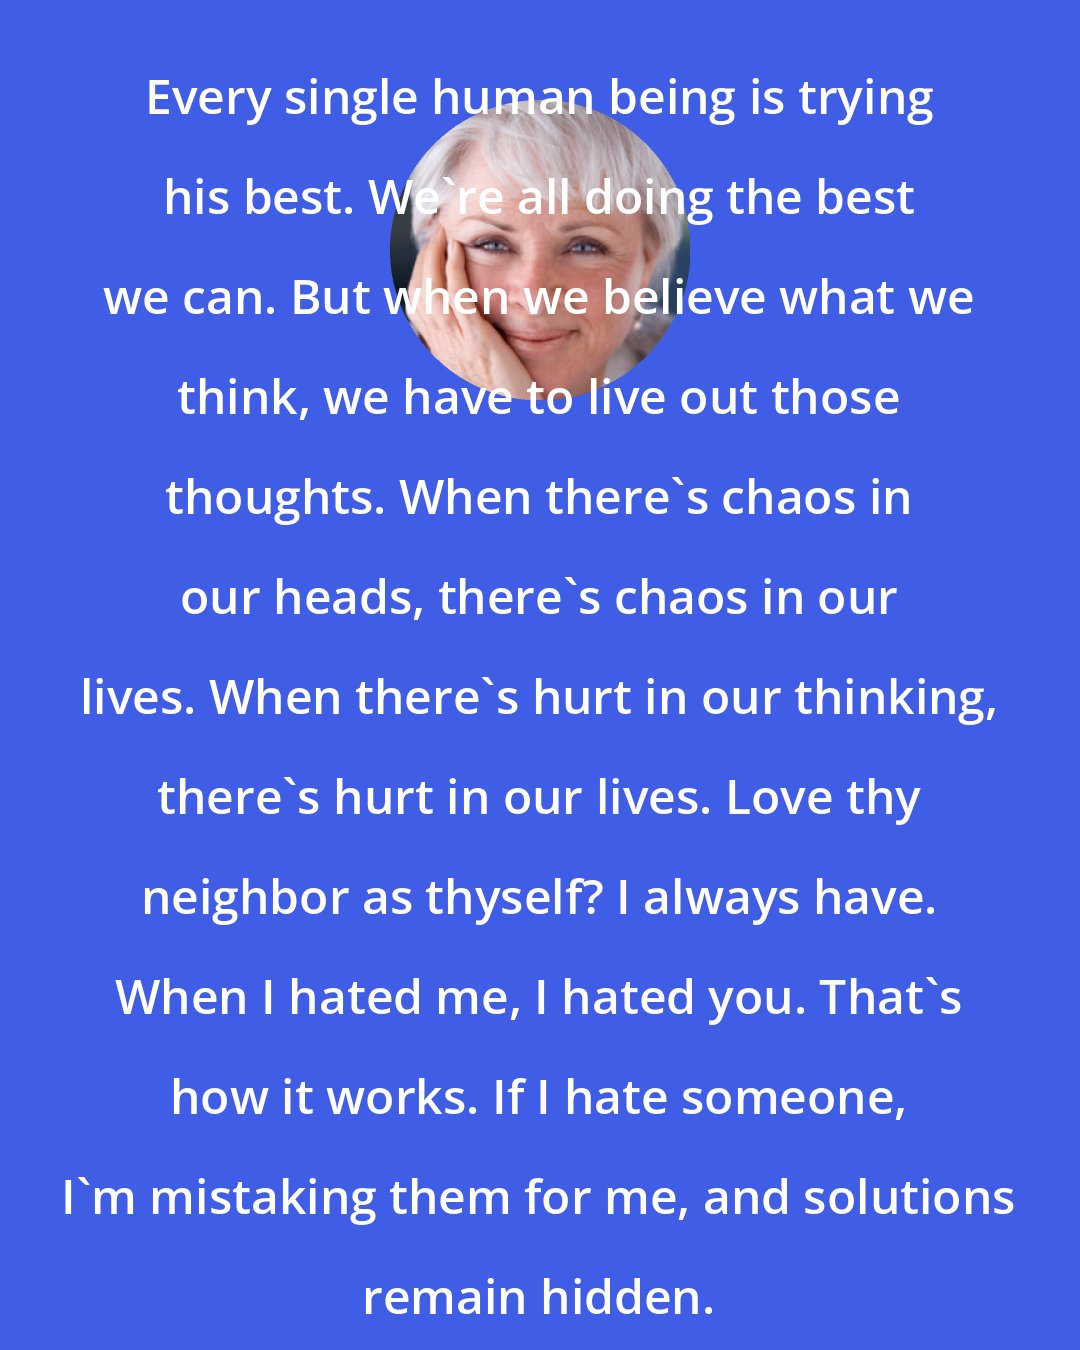 Byron Katie: Every single human being is trying his best. We're all doing the best we can. But when we believe what we think, we have to live out those thoughts. When there's chaos in our heads, there's chaos in our lives. When there's hurt in our thinking, there's hurt in our lives. Love thy neighbor as thyself? I always have. When I hated me, I hated you. That's how it works. If I hate someone, I'm mistaking them for me, and solutions remain hidden.